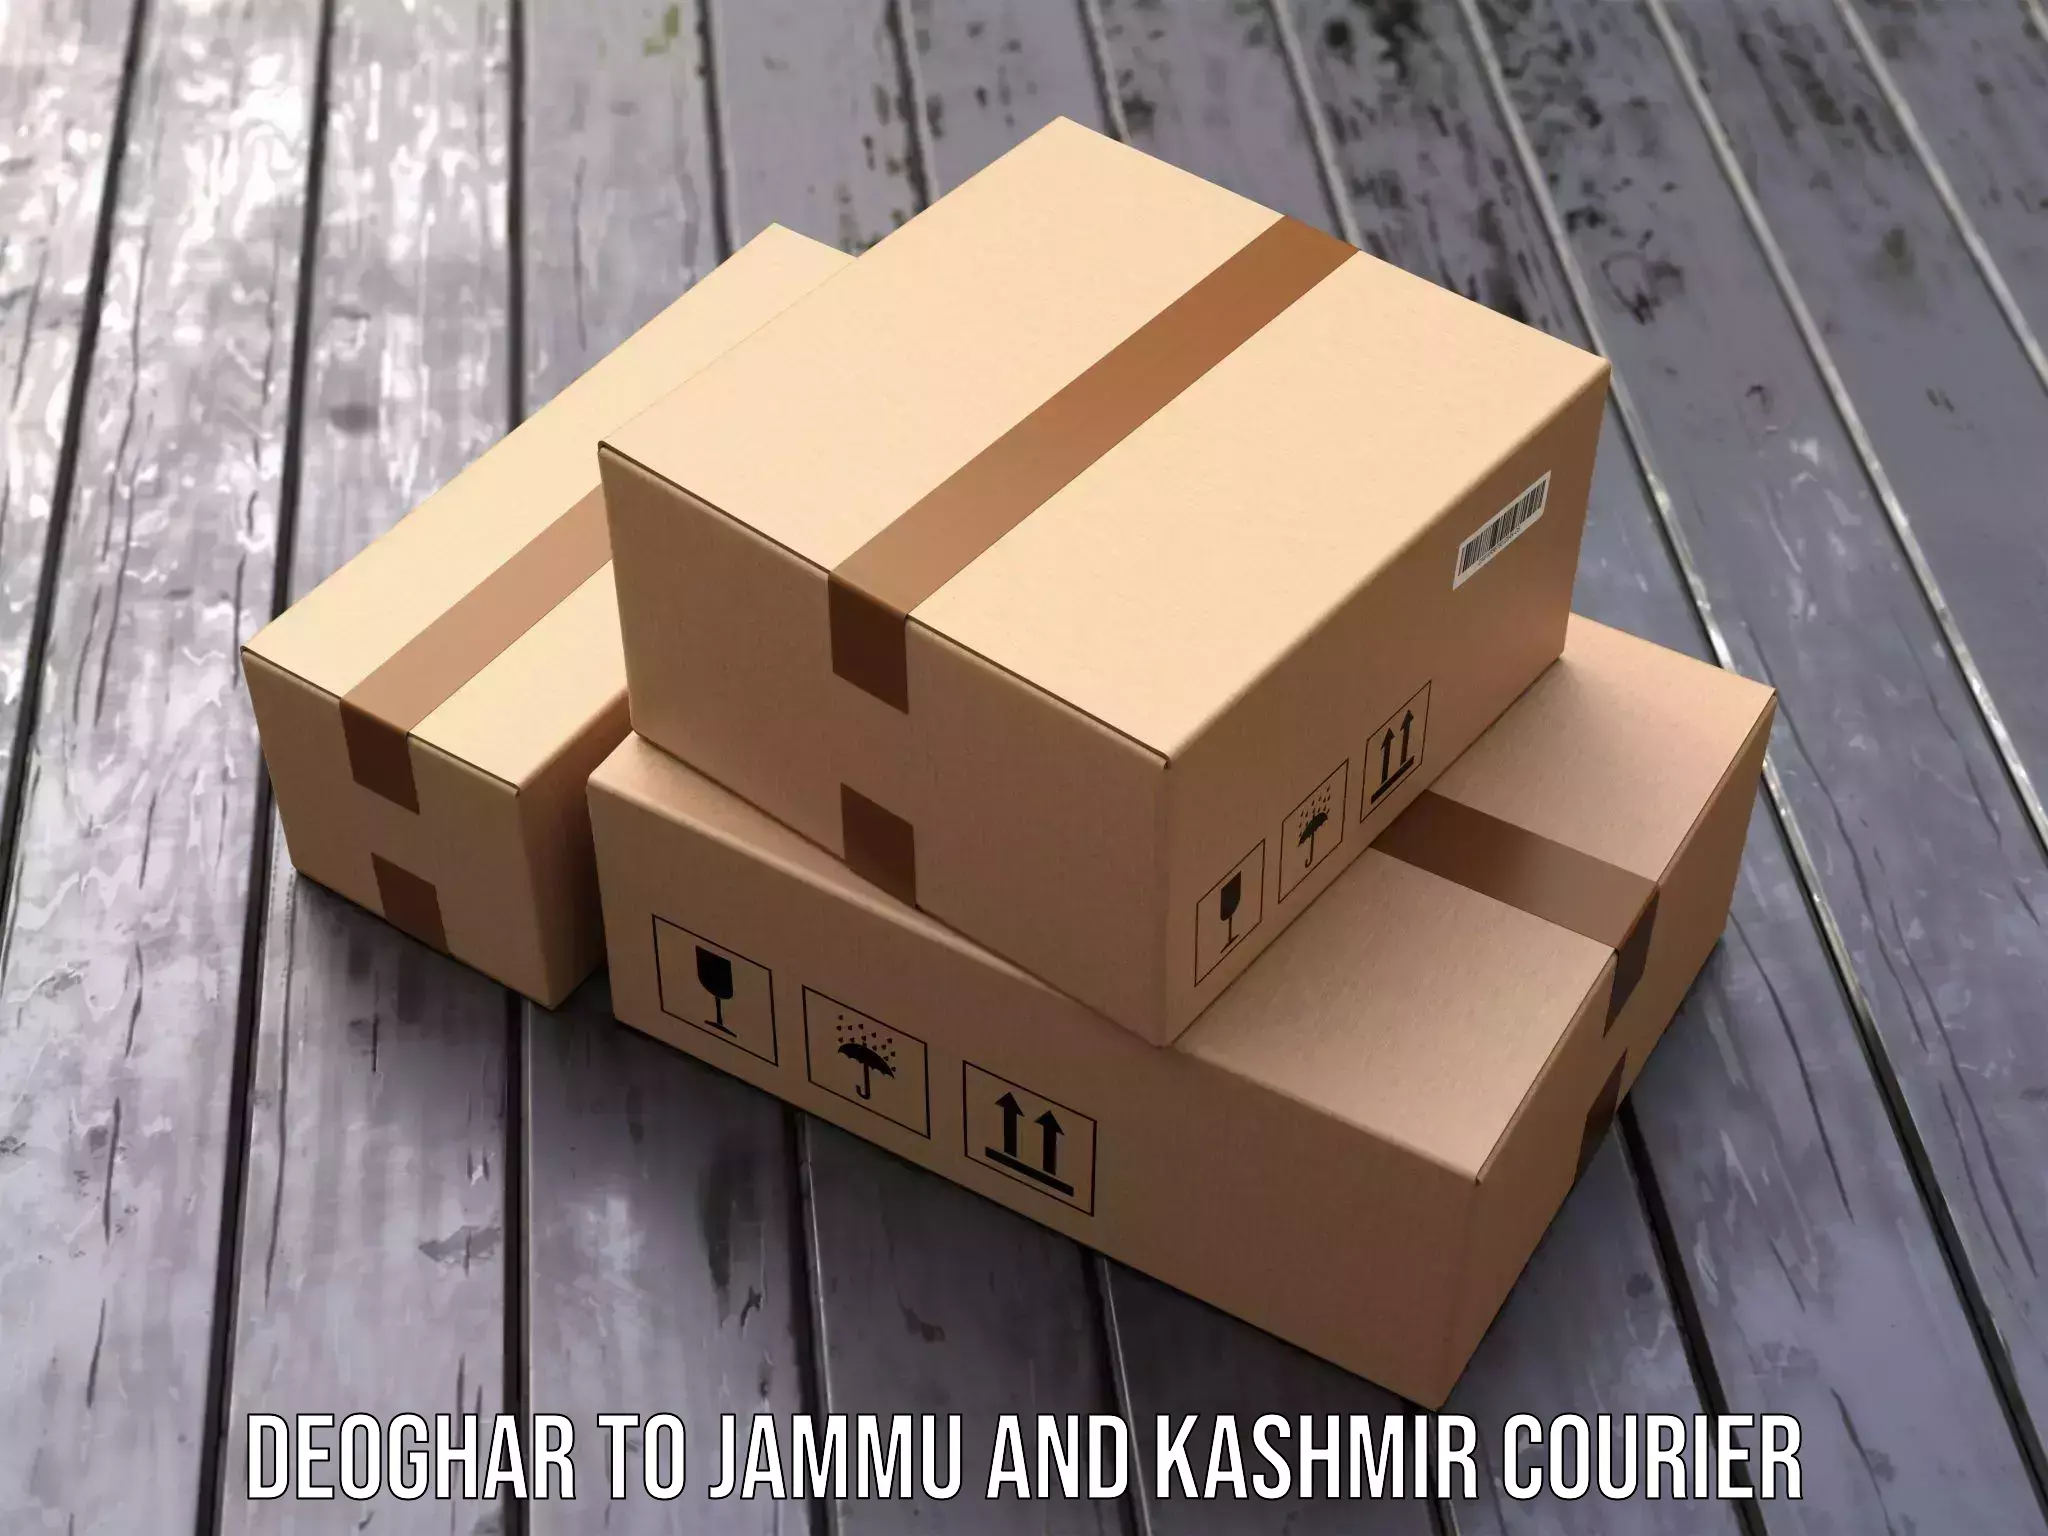 High-speed parcel service Deoghar to Shopian